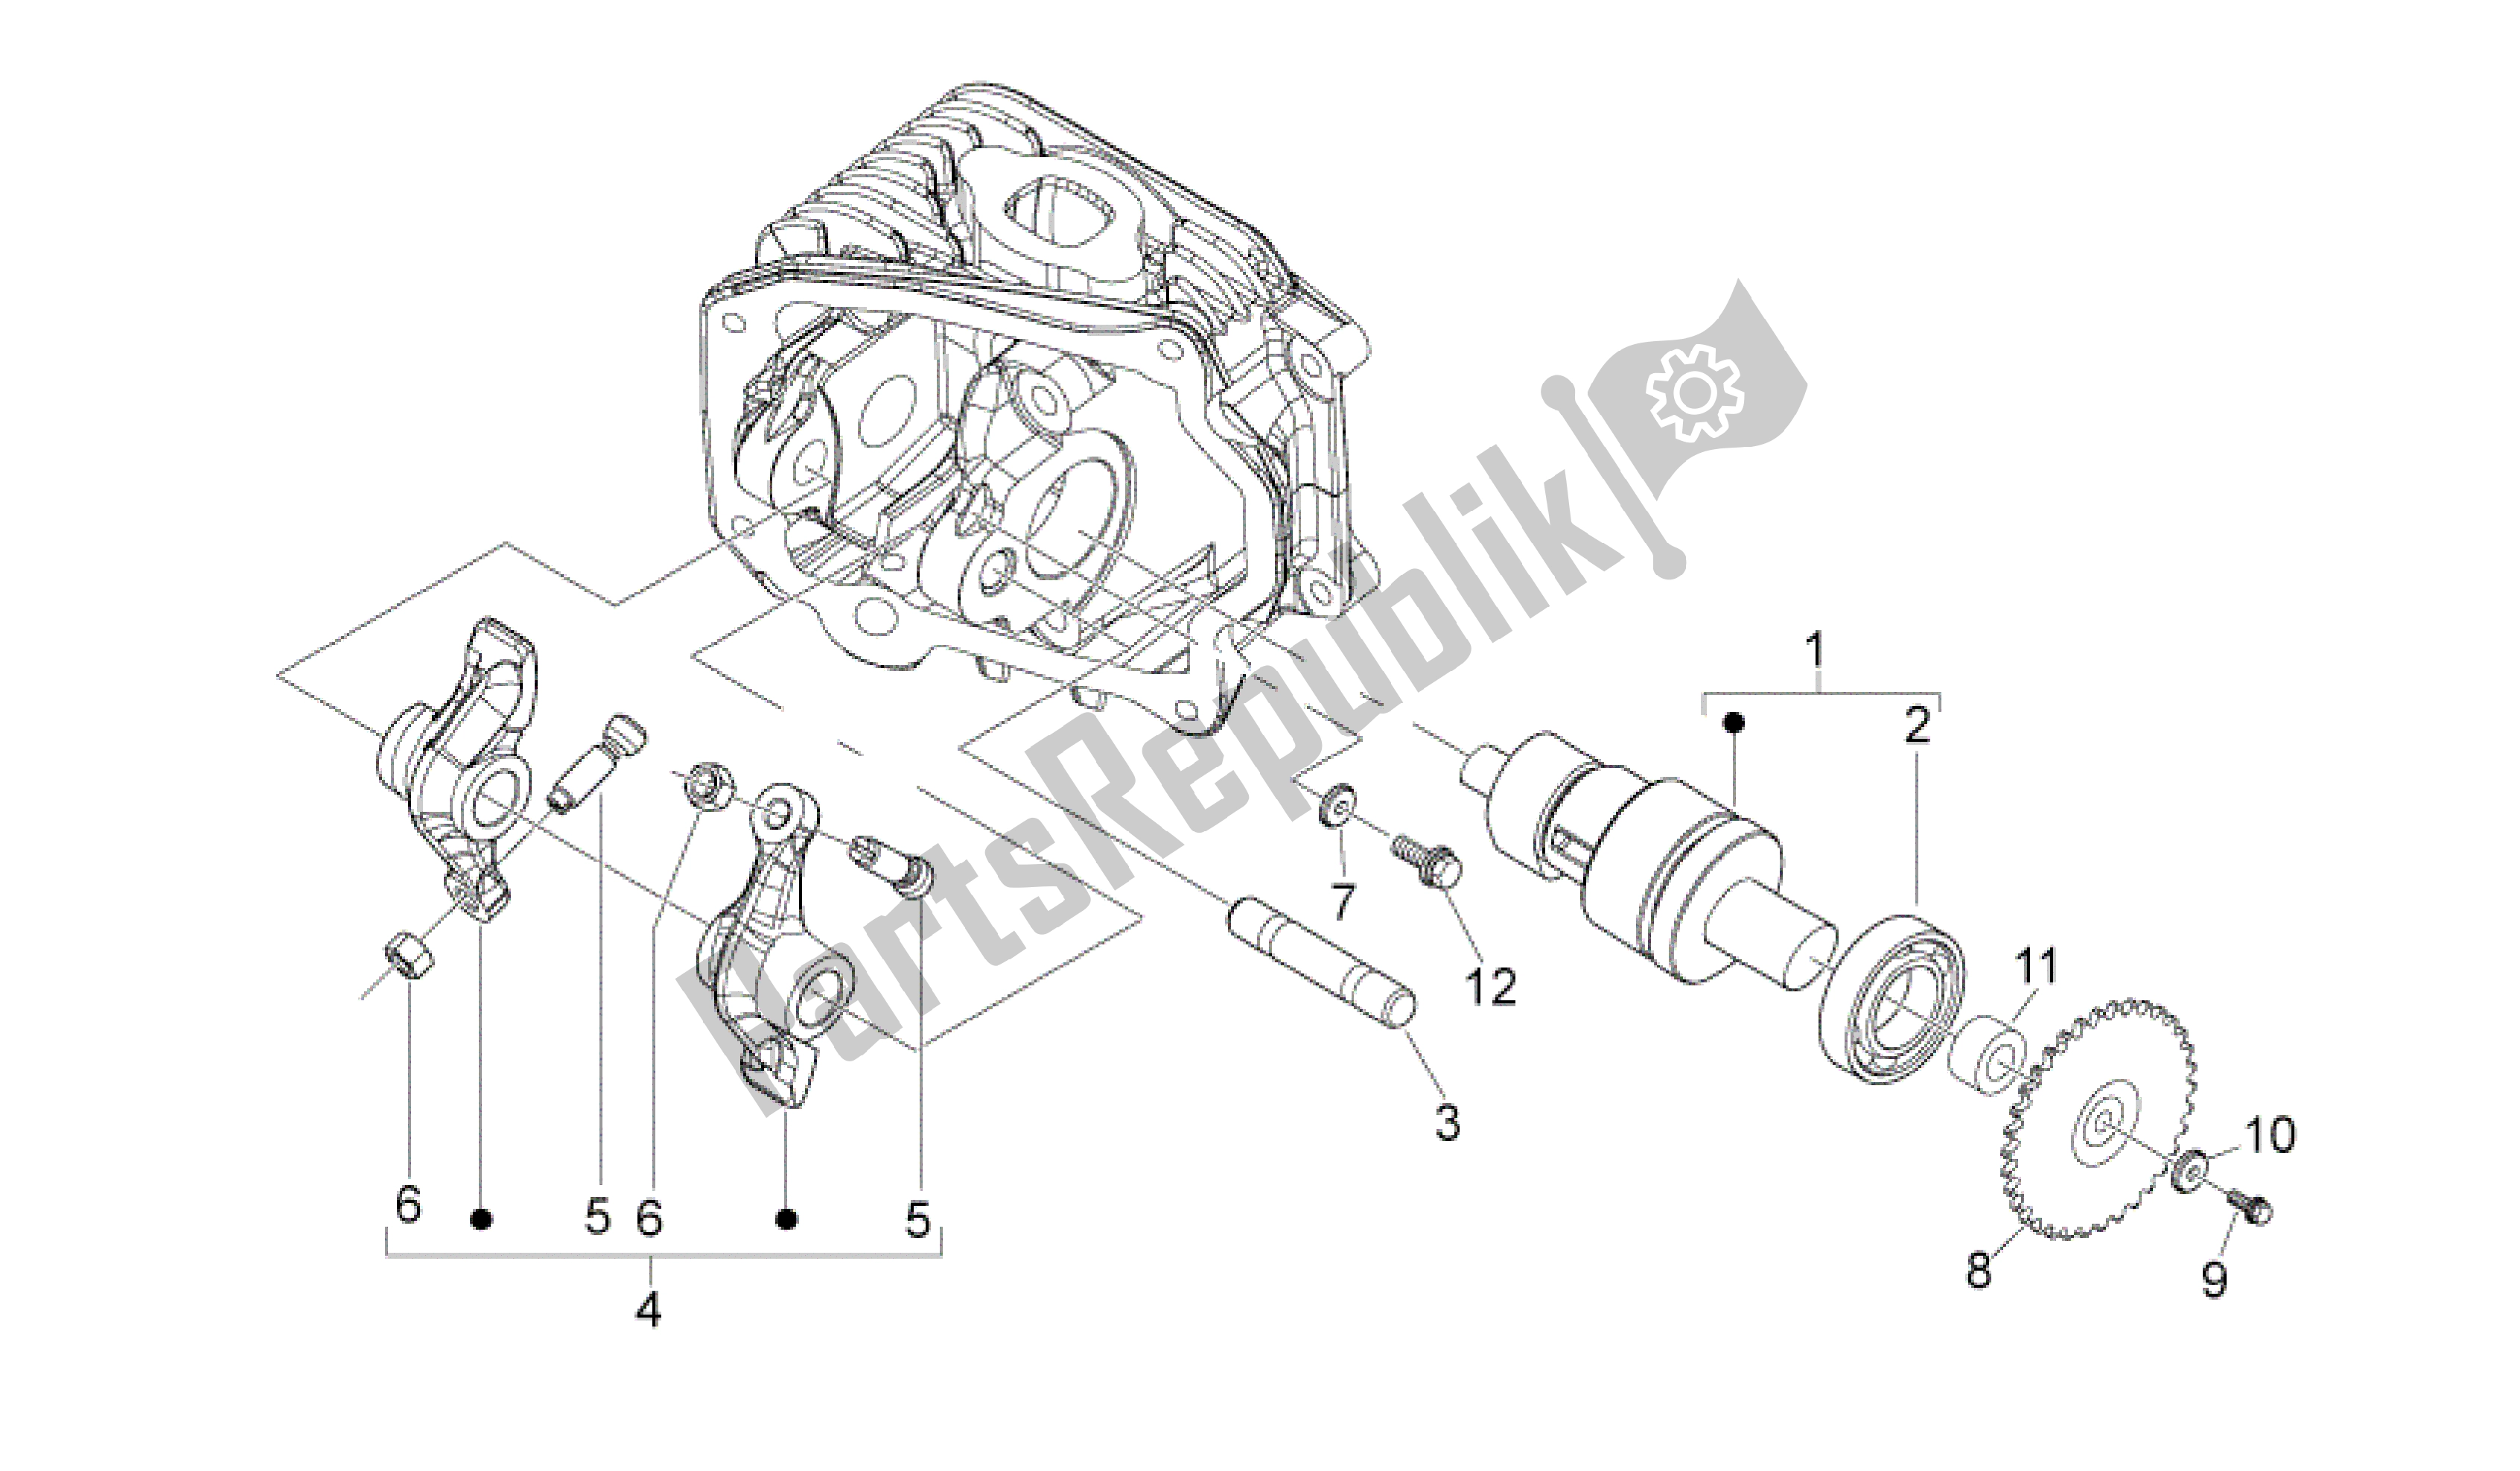 All parts for the Camshaft of the Aprilia Sport City 50 2008 - 2010